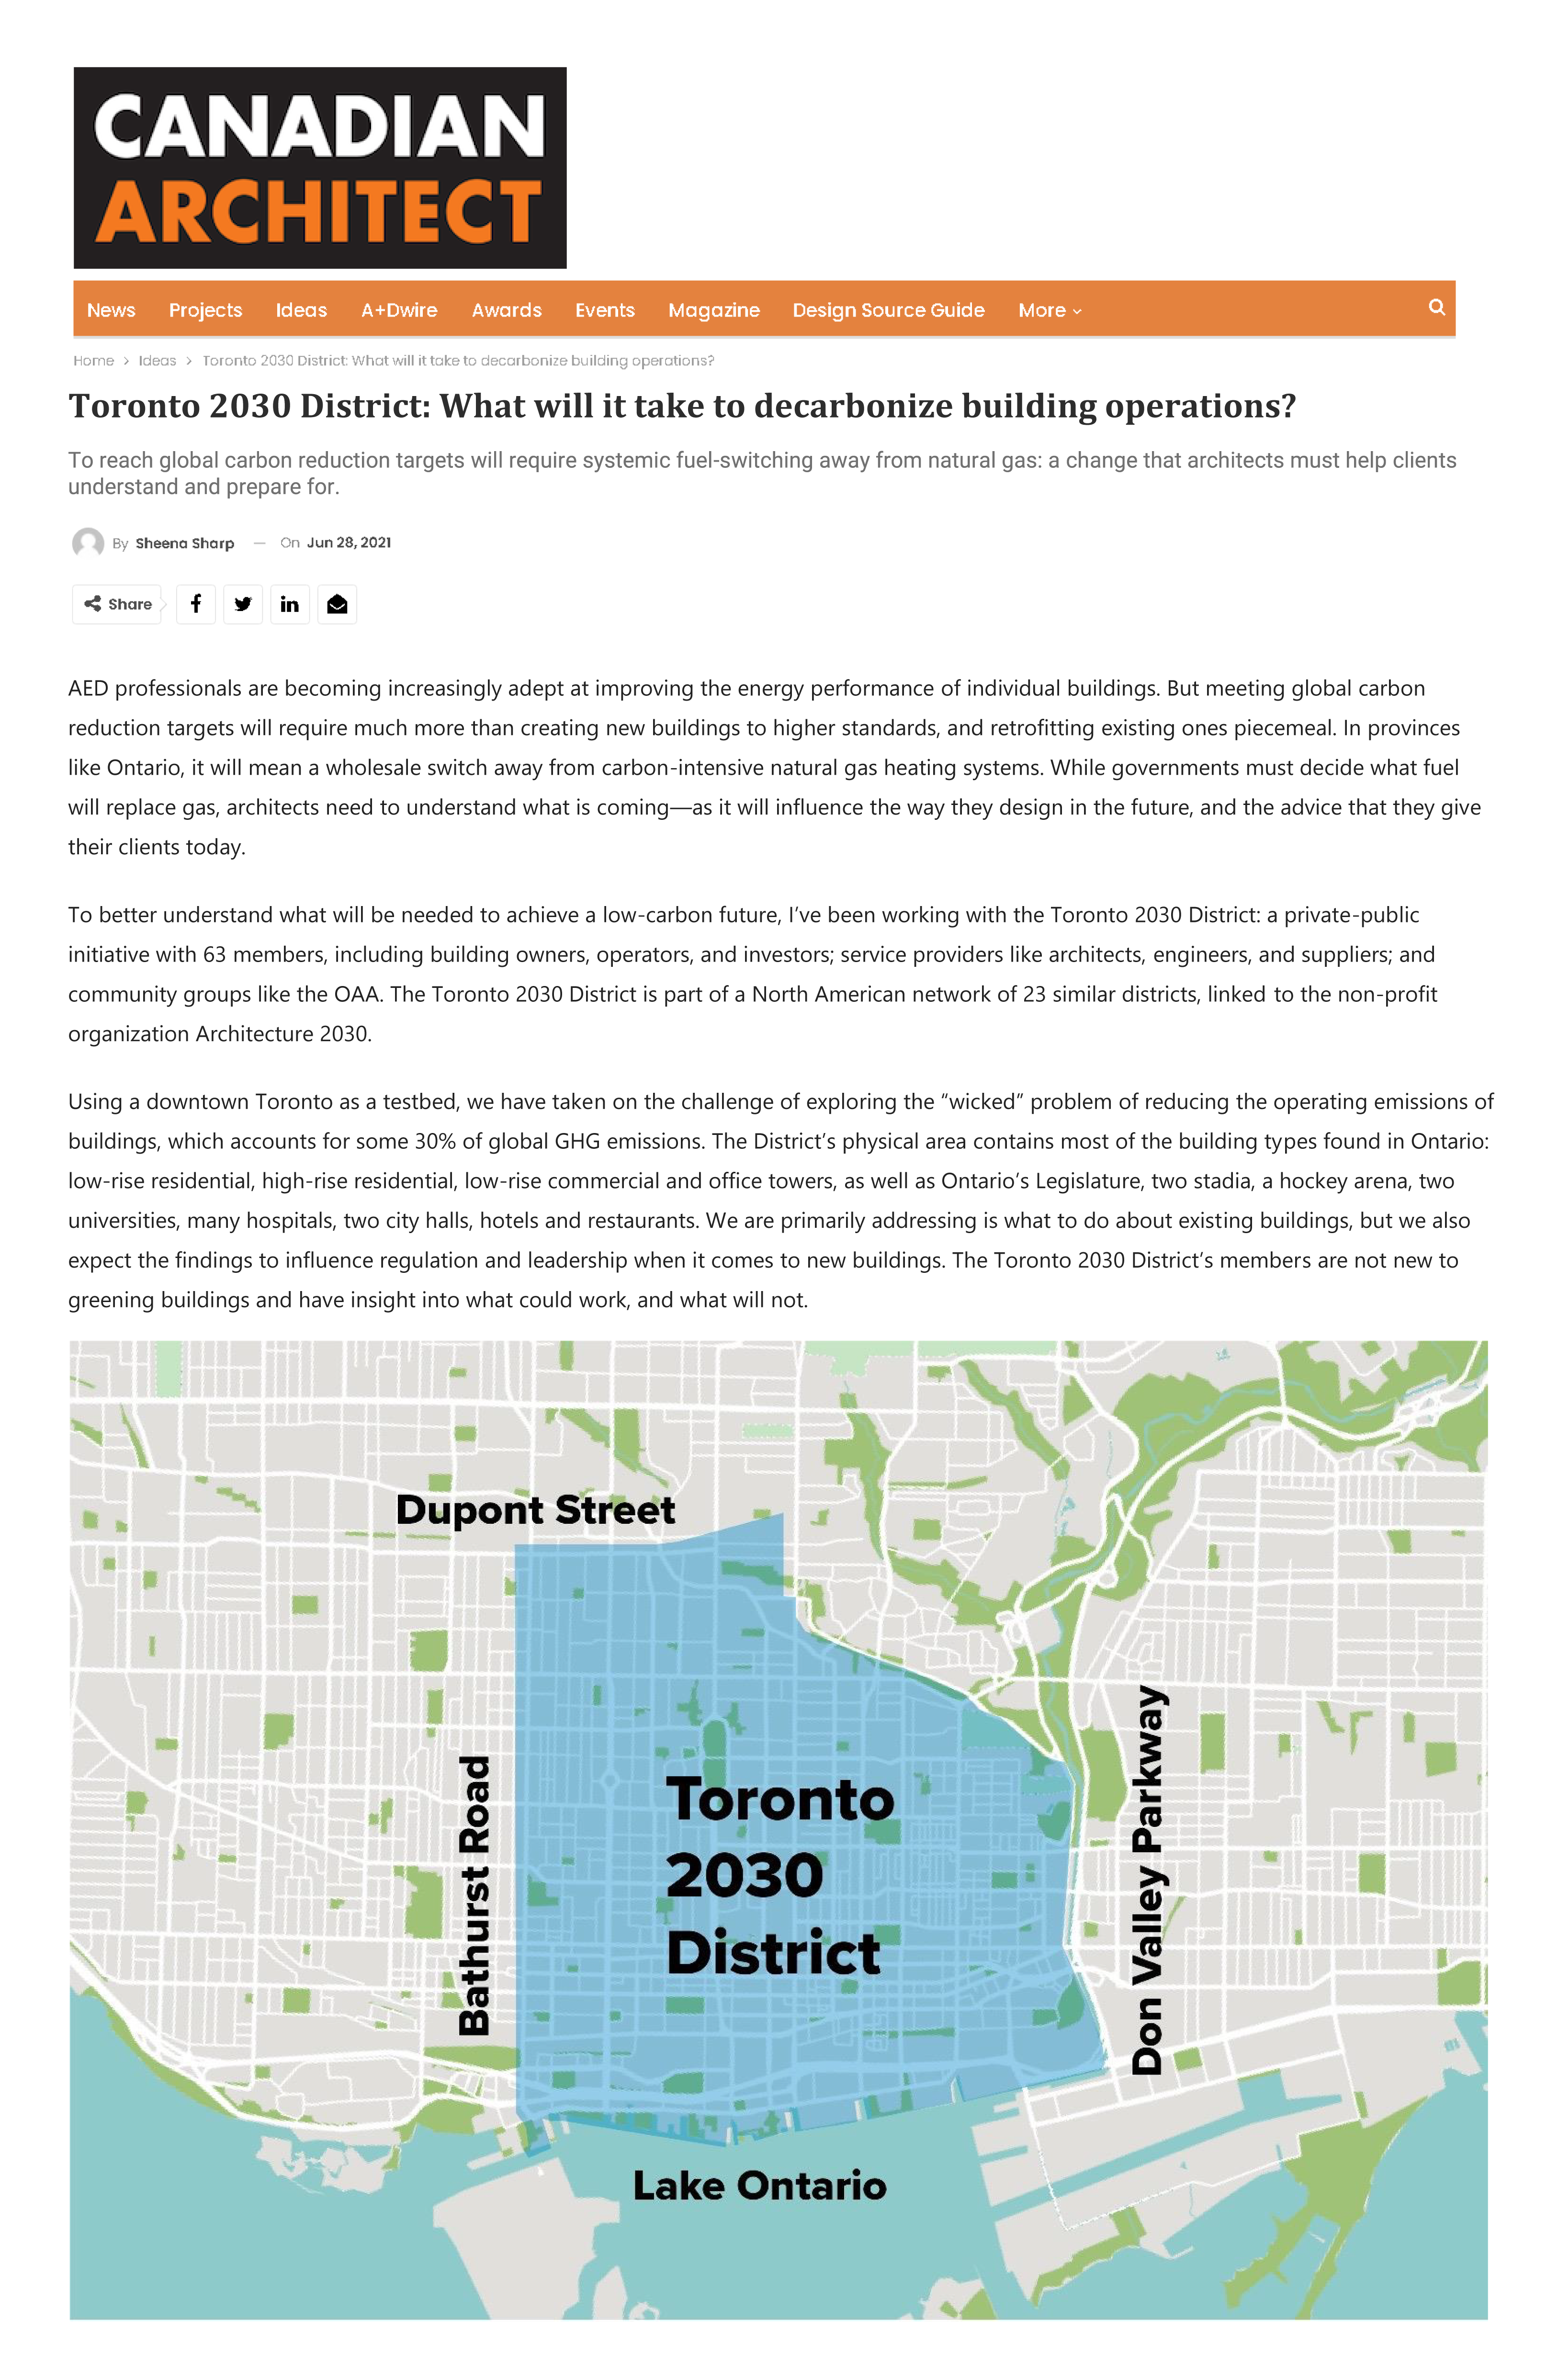 New Article In Canadian Architect Magazine: Toronto 2030 District: What will it take to decarbonize building operations?